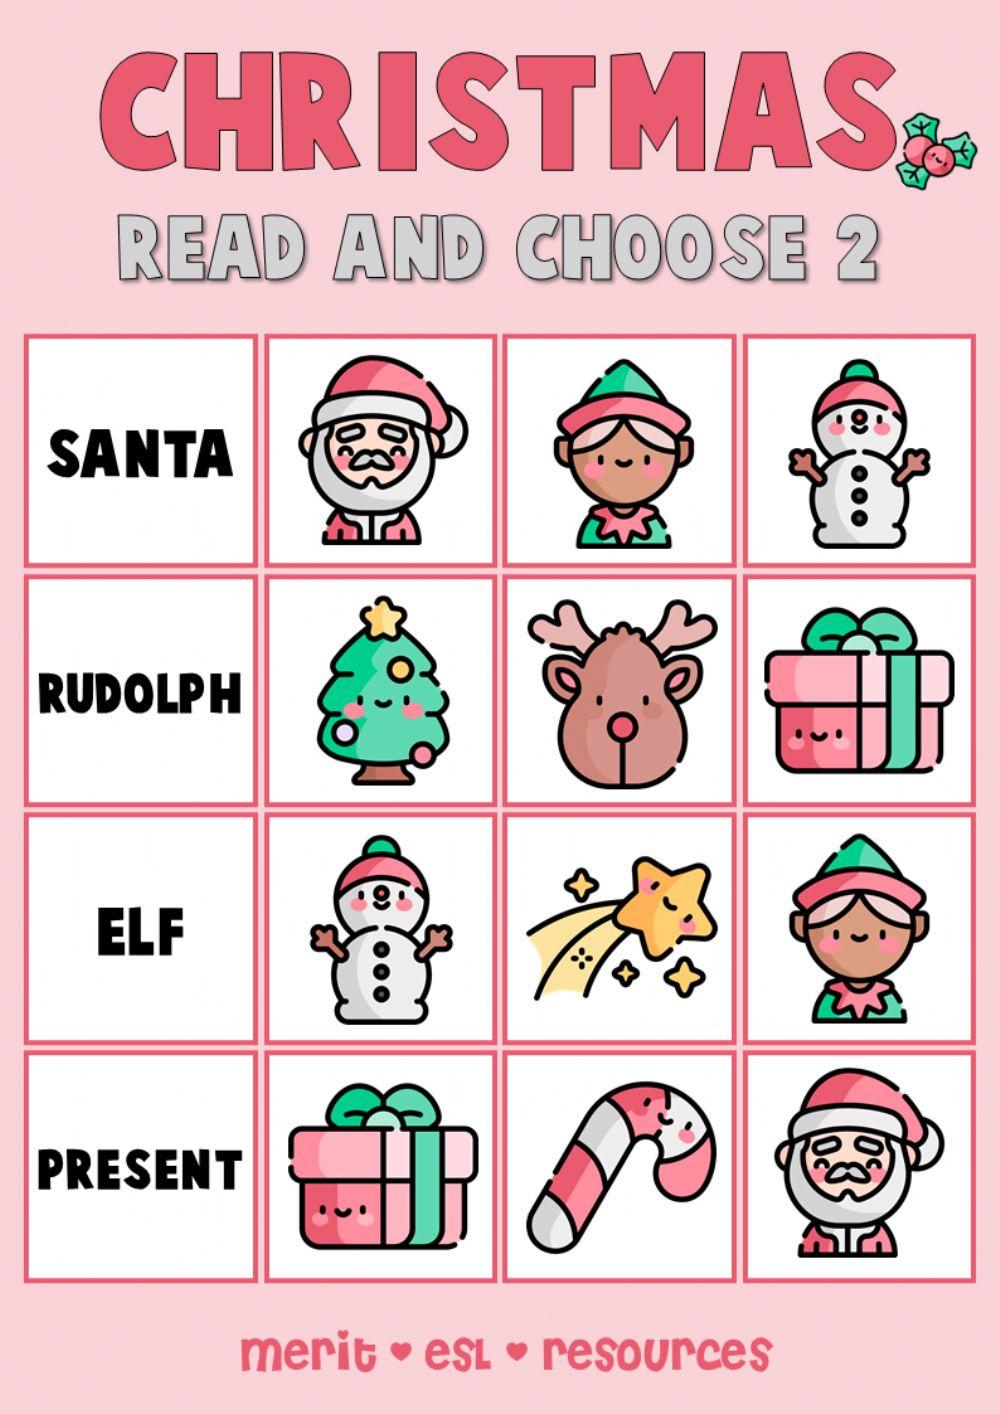 Christmas - Read and choose 2